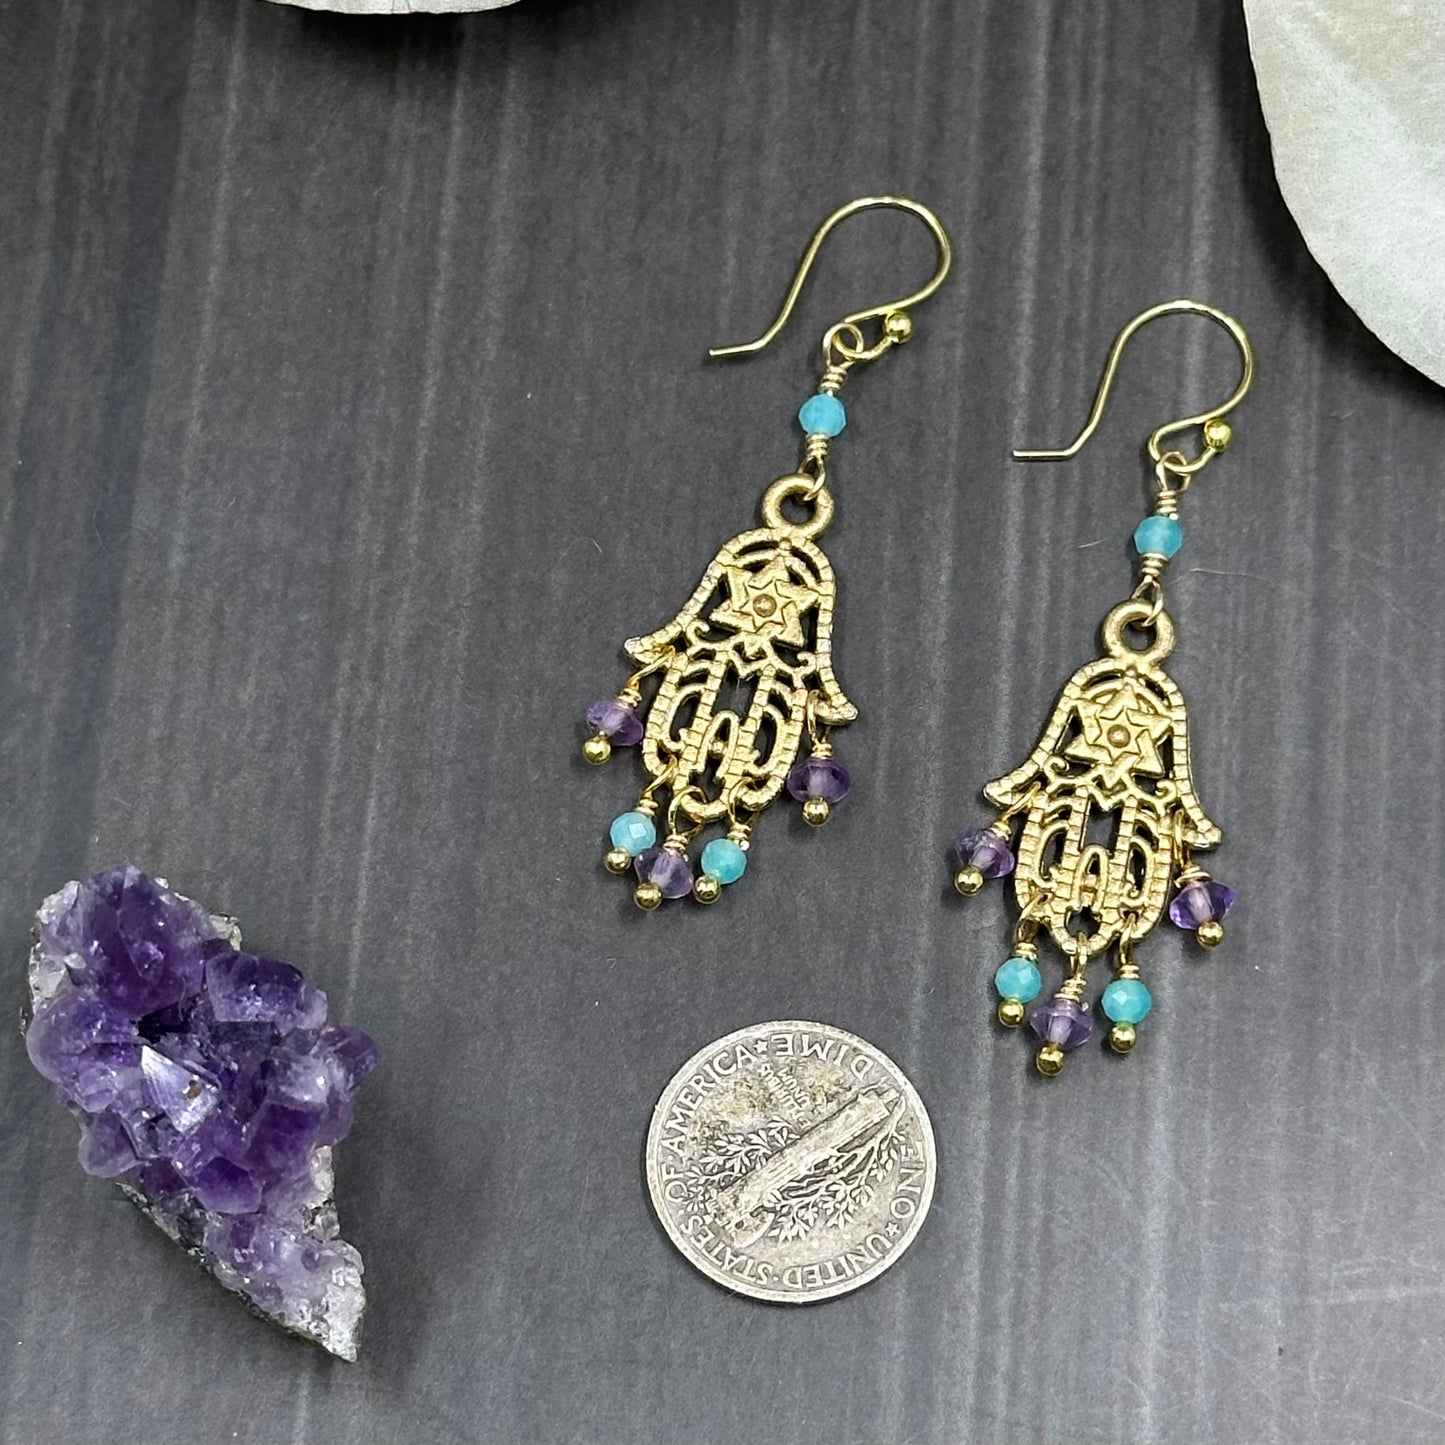 Gold Colored Hamsa Earrings with Amazonite and Amethyst